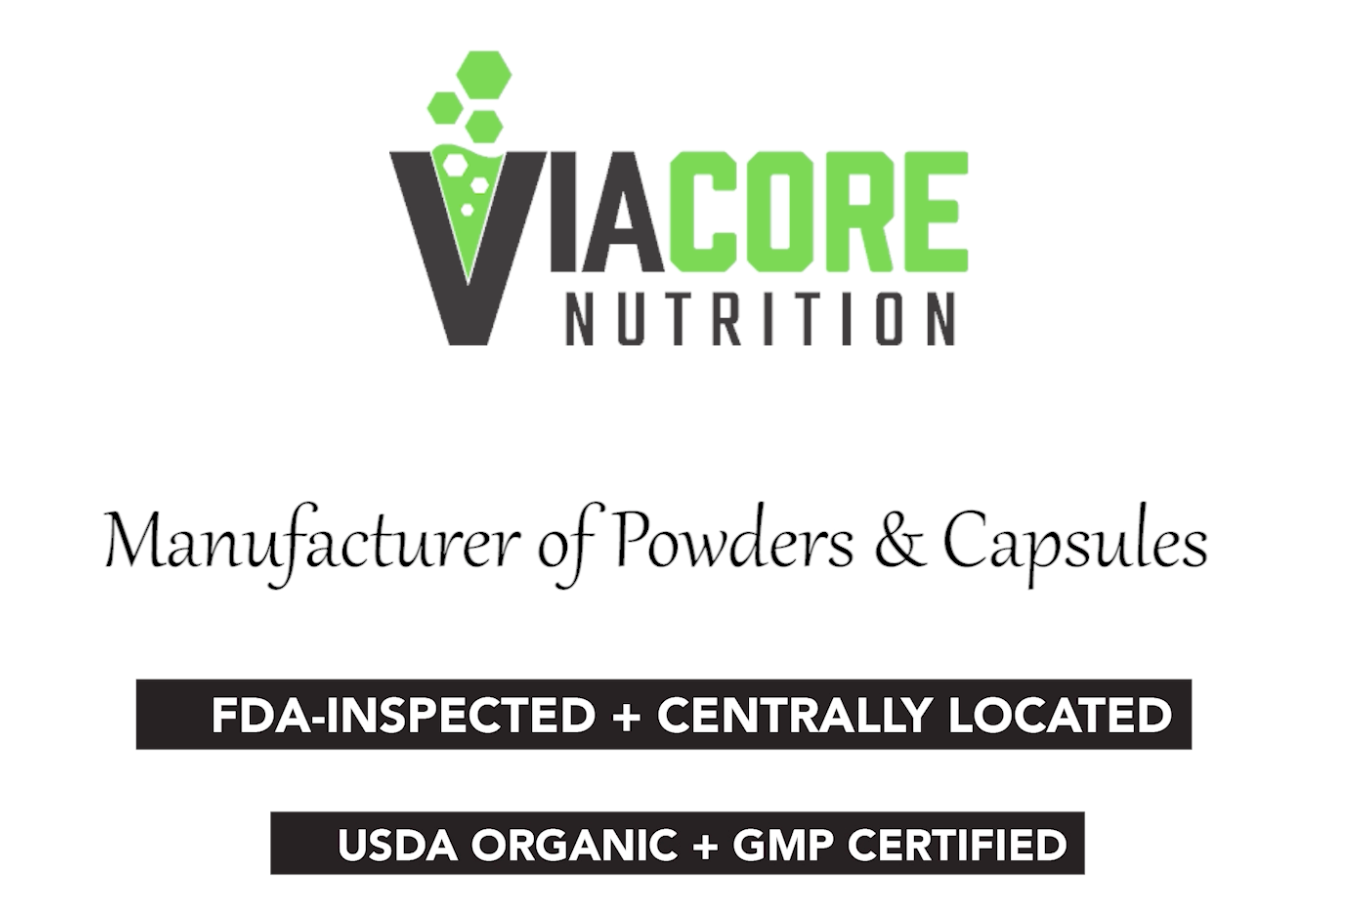 Load video: ViaCore Nutrition Overview